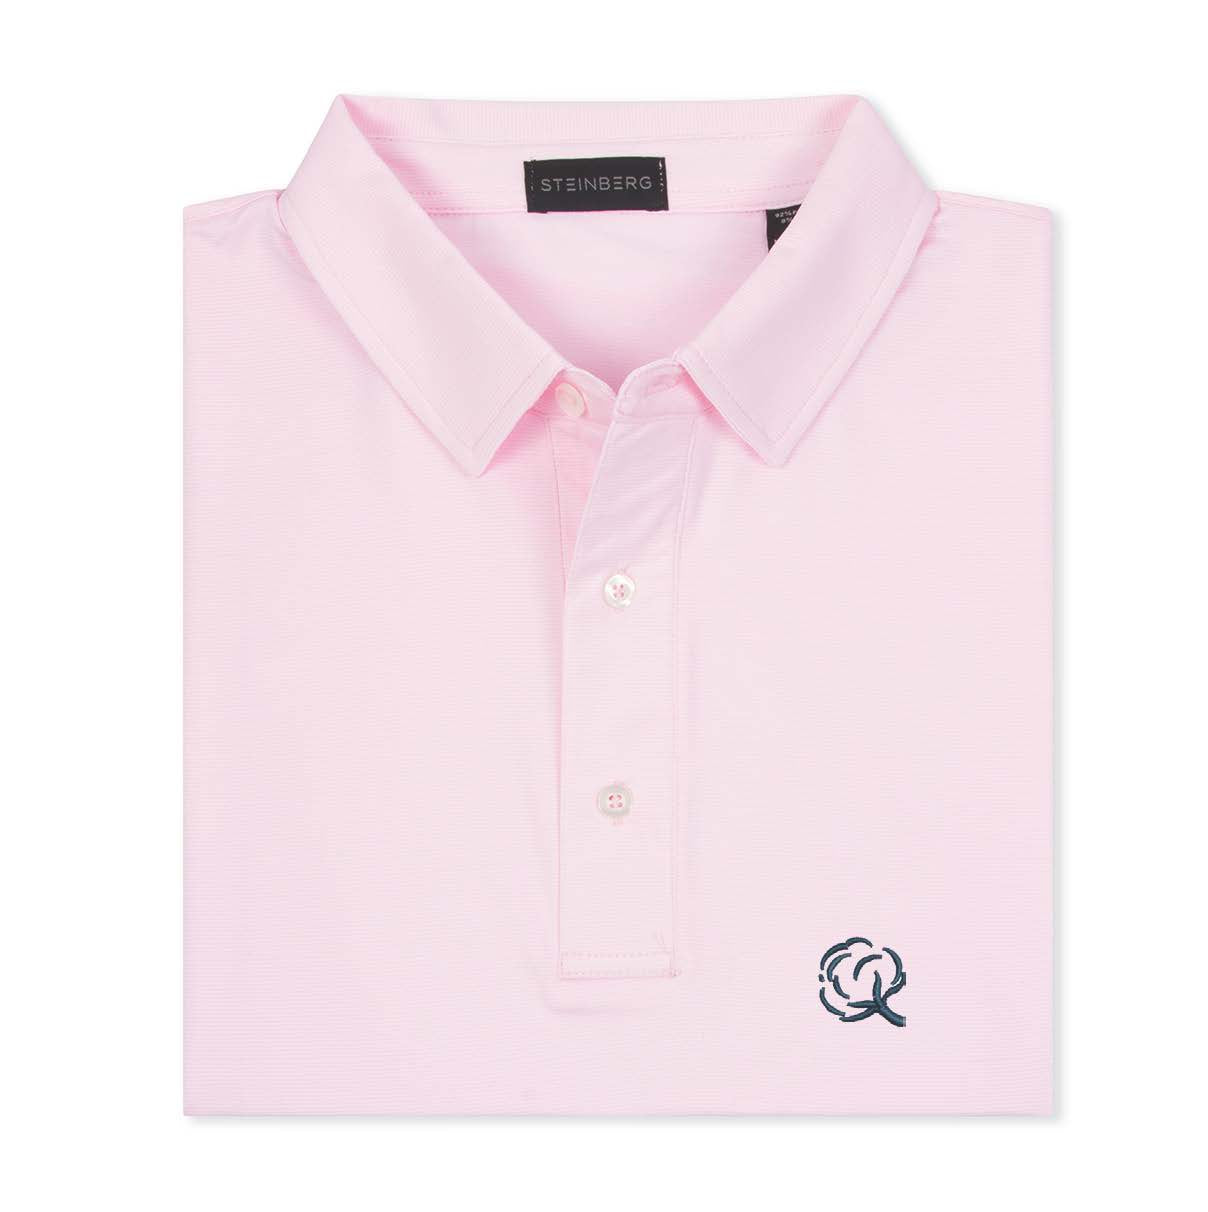 The Scratch Performance Polo Cotton Collection